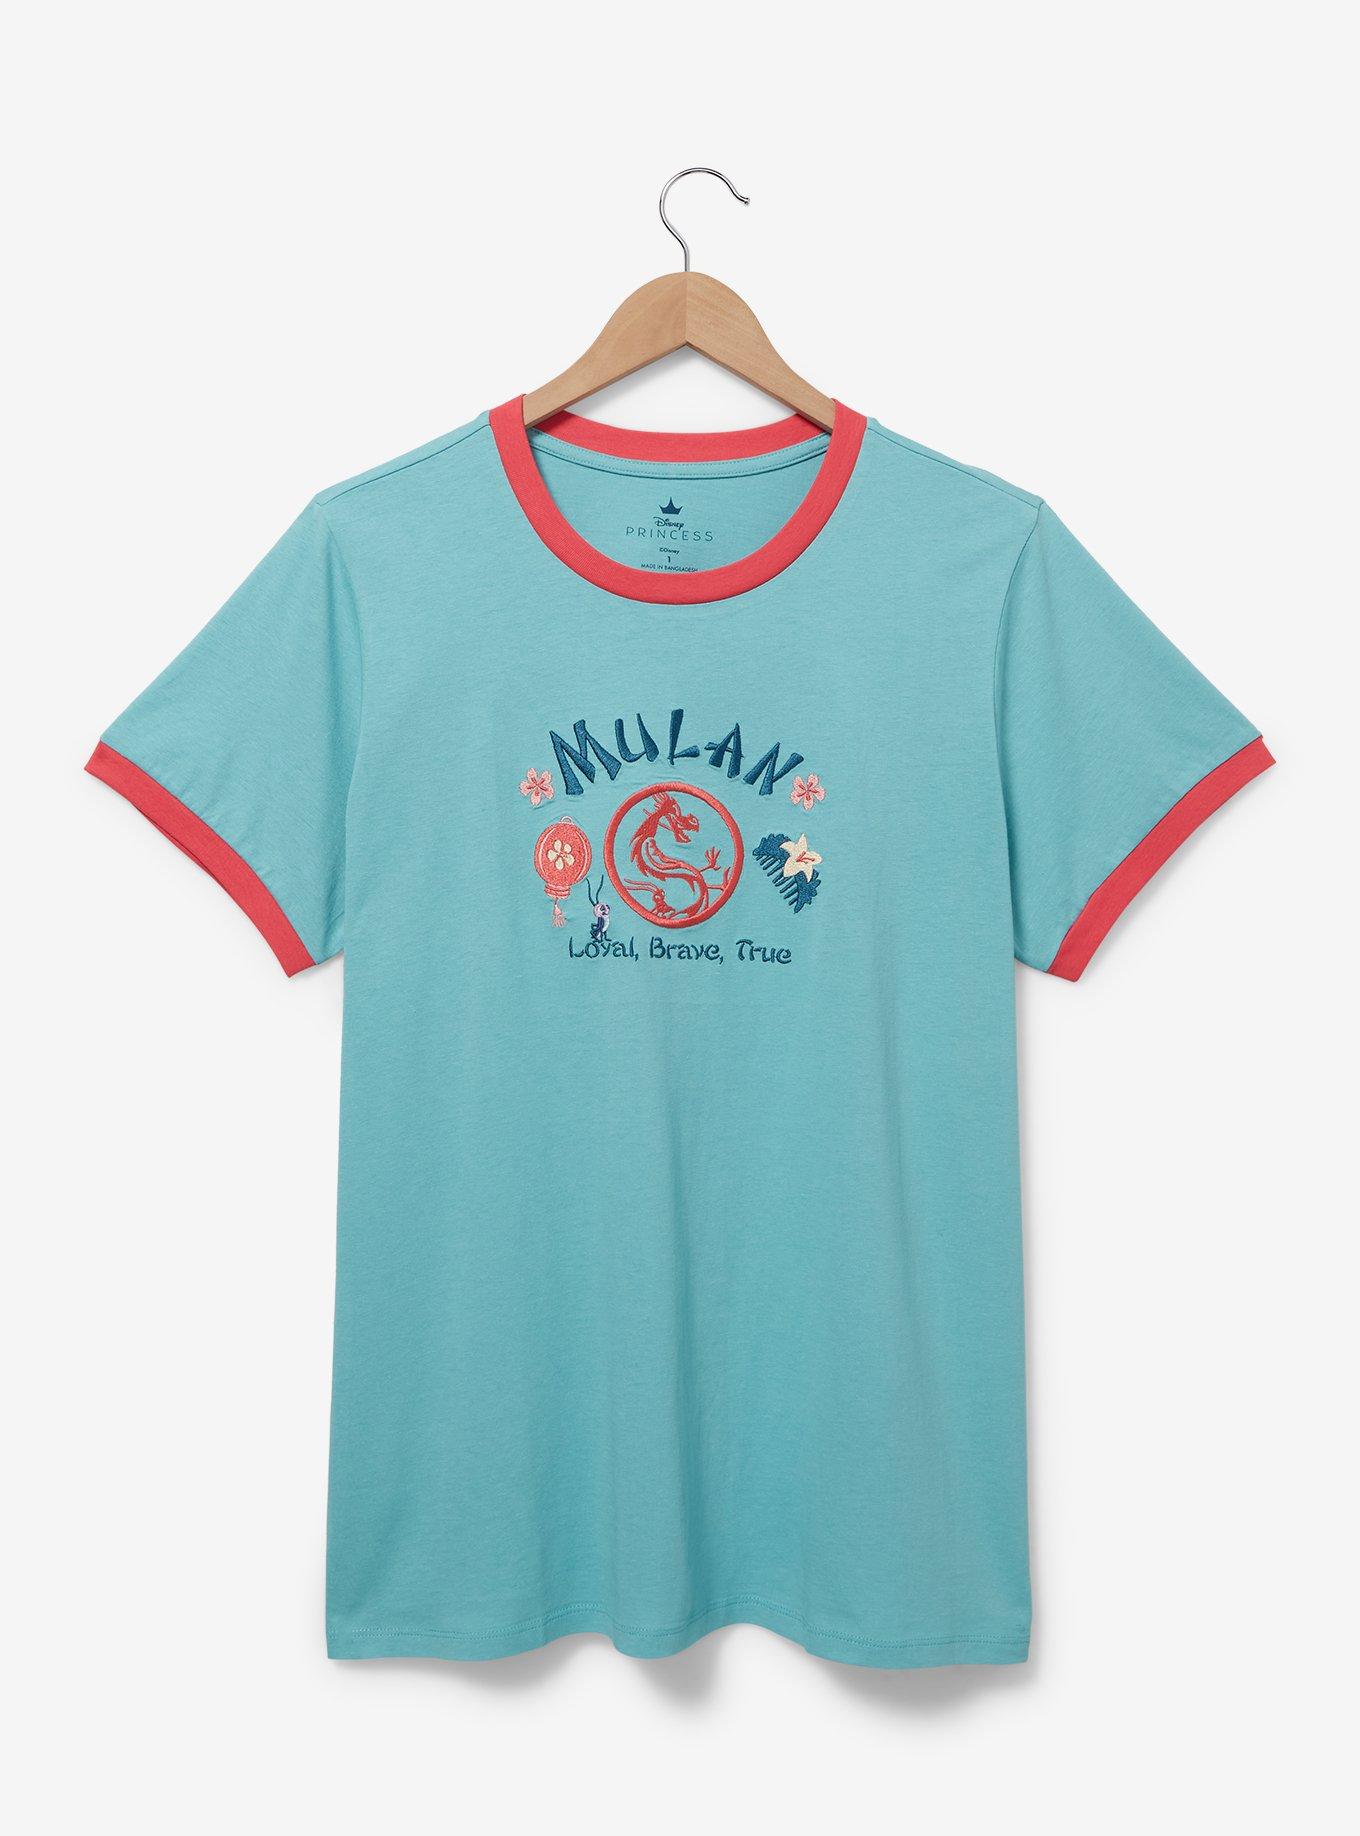 Disney Mulan Embroidered Women's Plus Size Ringer T-Shirt — BoxLunch Exclusive, , hi-res